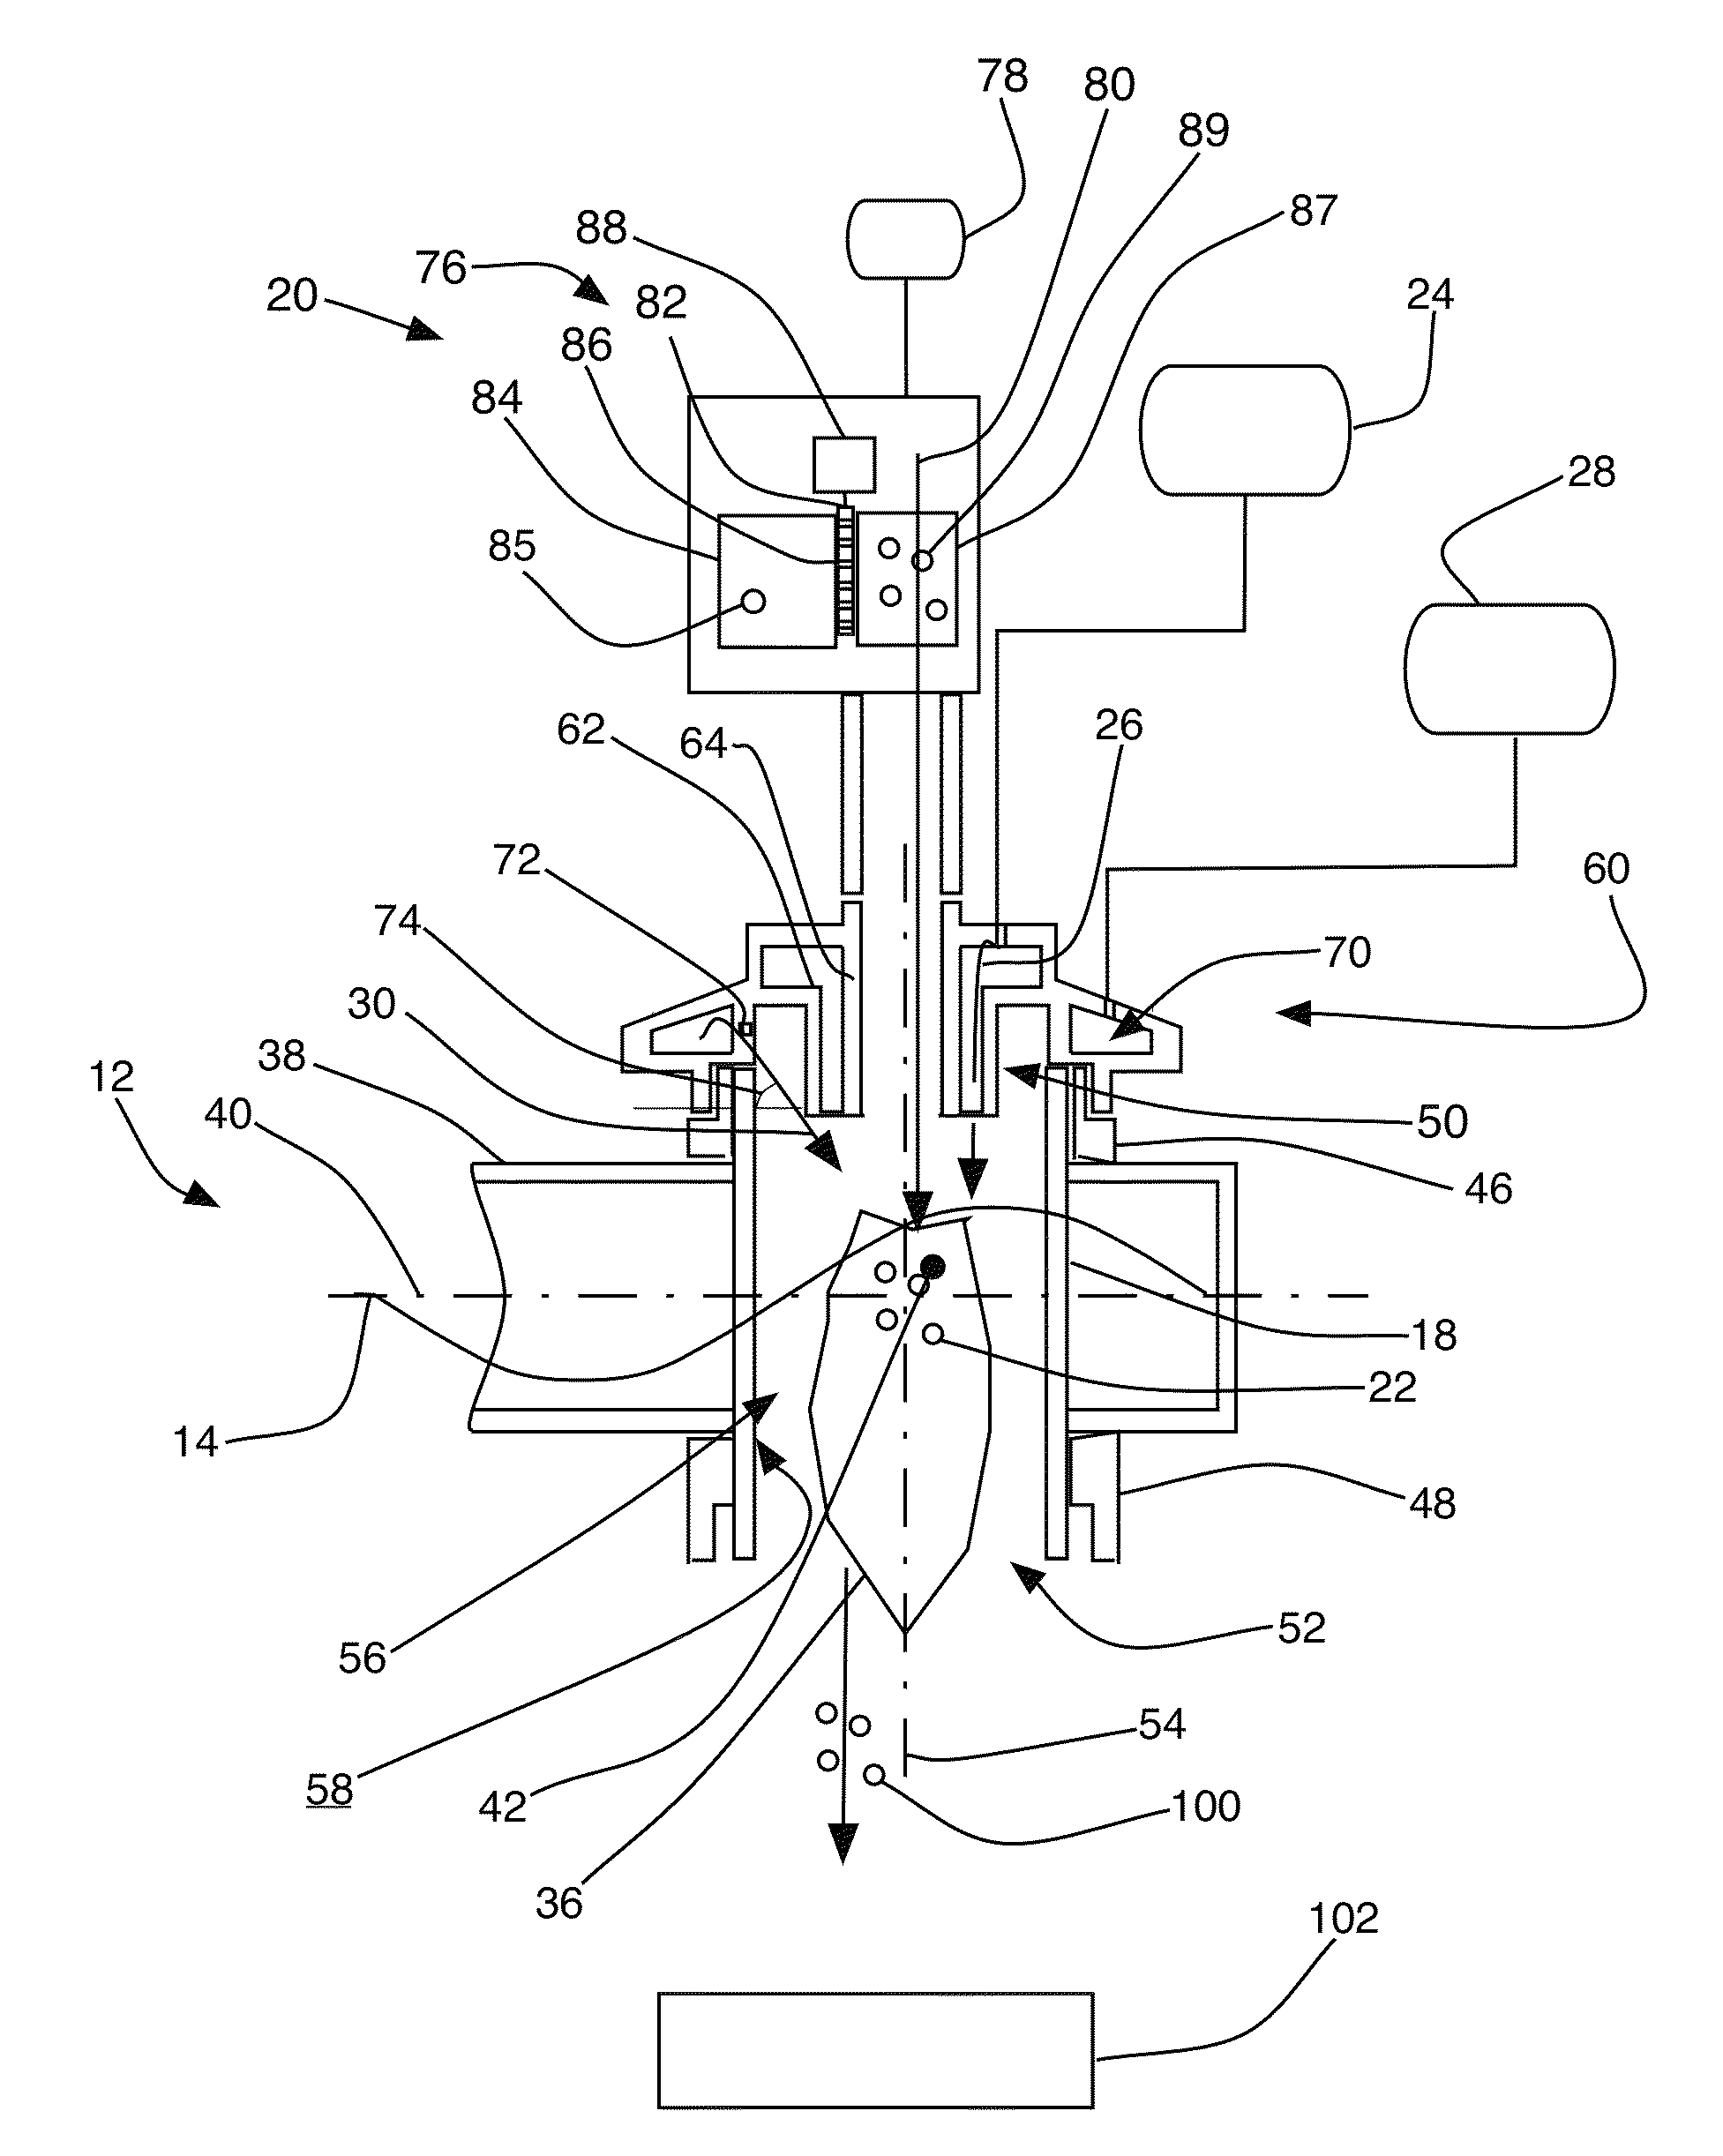 Microwave plasma apparatus and method for materials processing